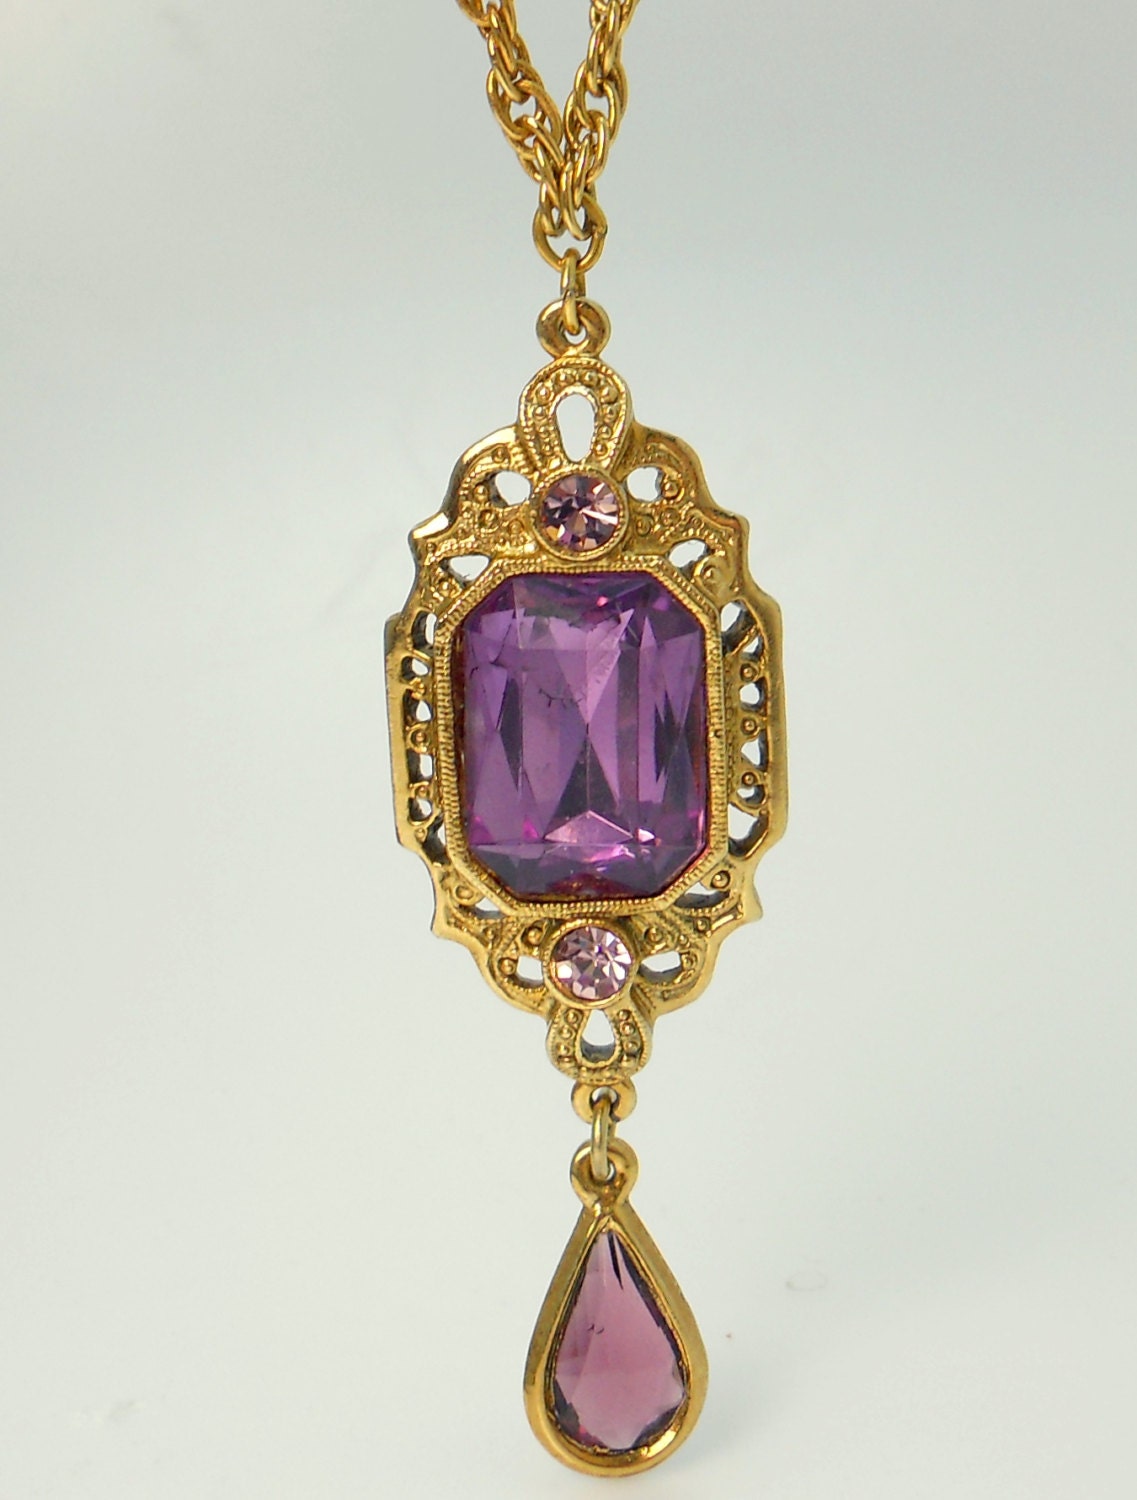 On Hold 1928 Jewelry Co Amethyst Pendant Necklace